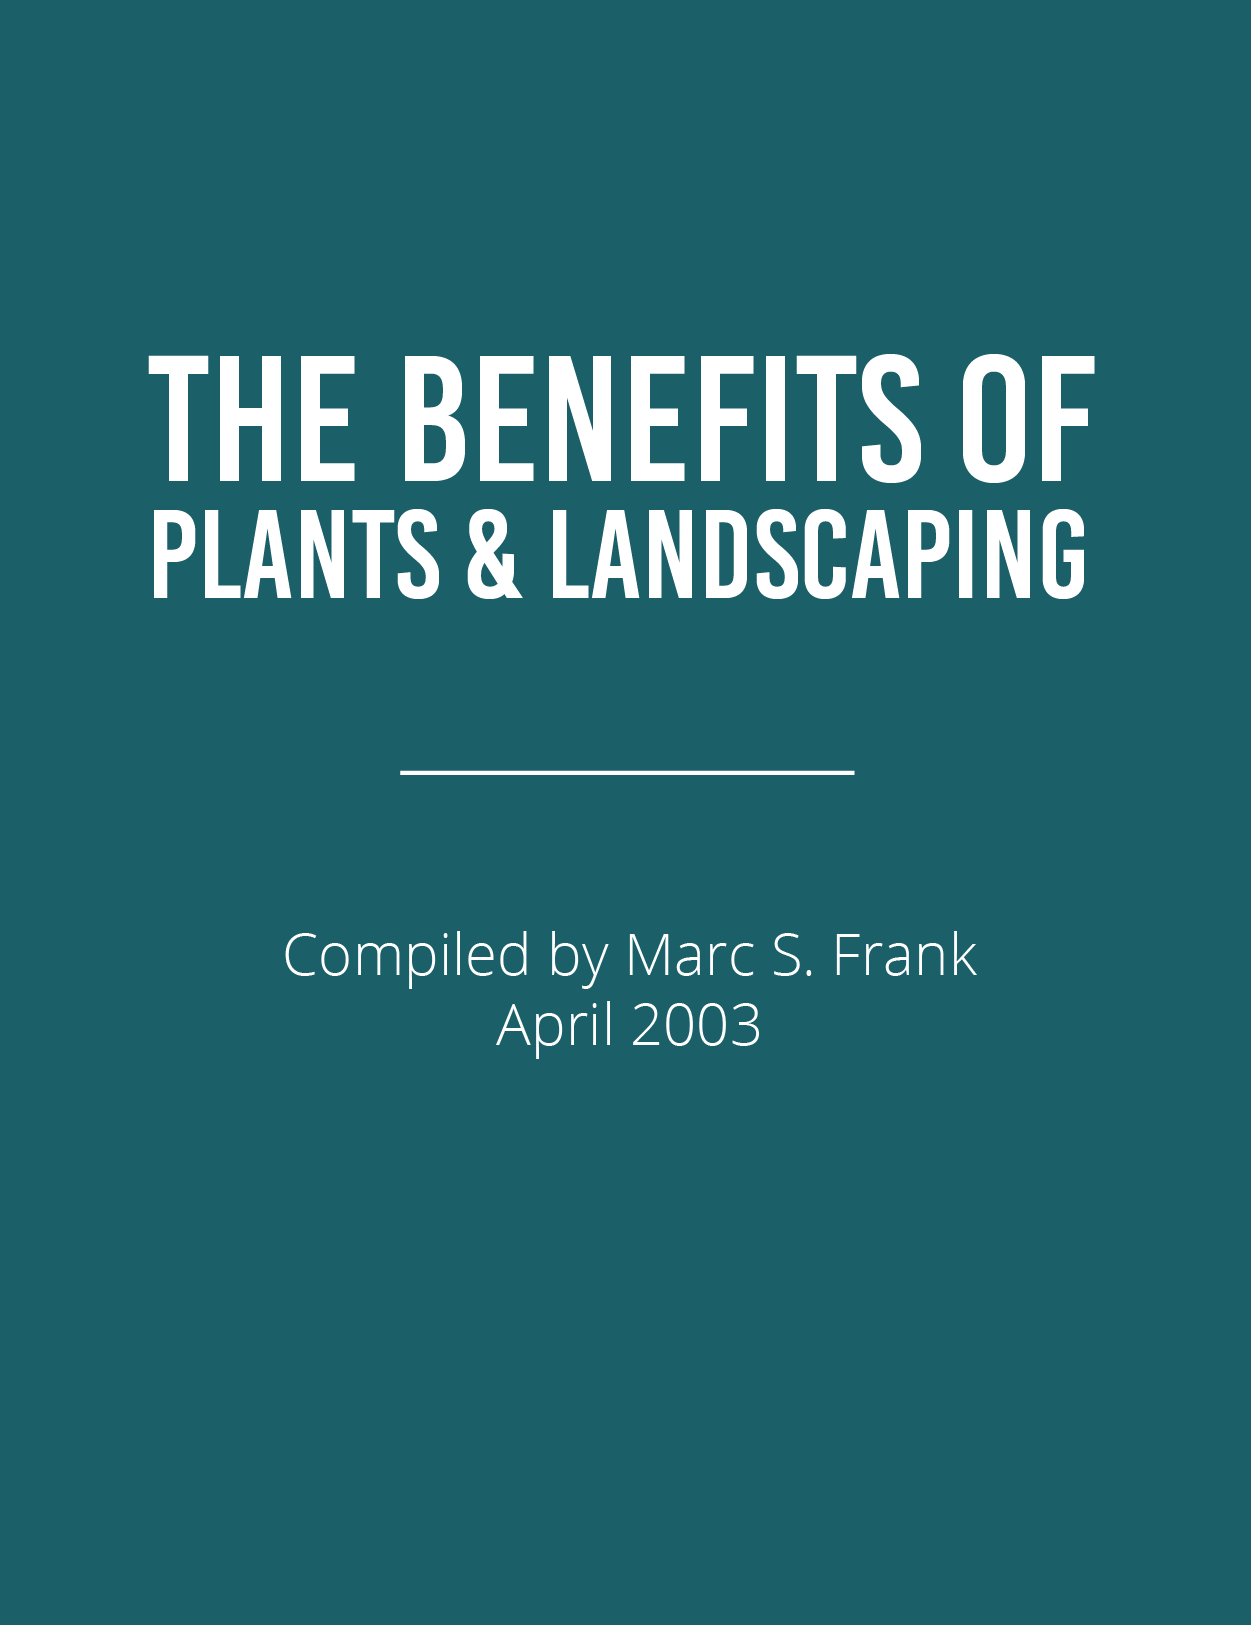 The Benefits of Plants & LandscapingFeatured Image